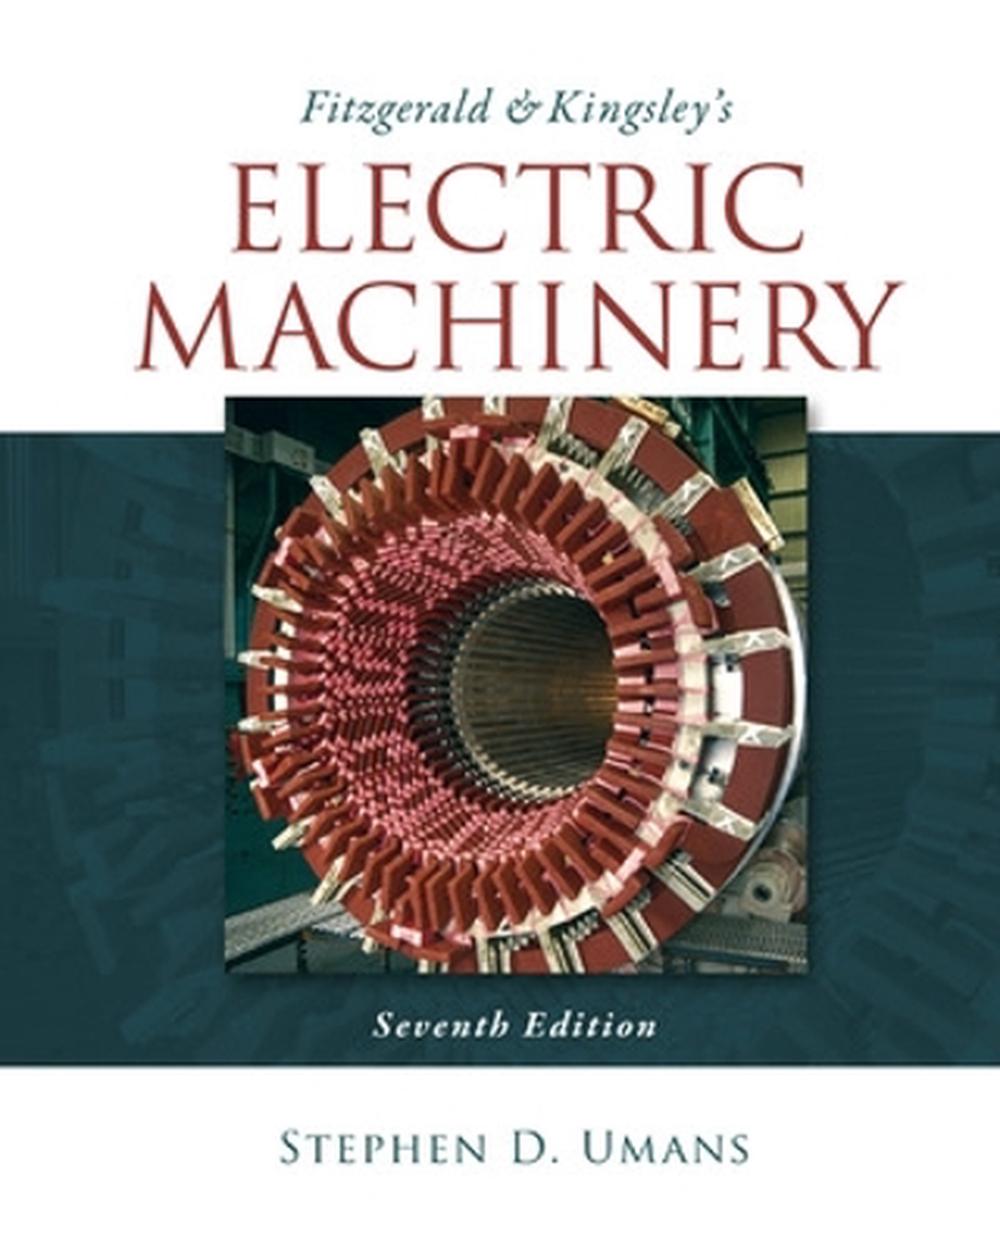 Fitzgerald & Kingsley's Electric Machinery 7th Edition by Stephen D